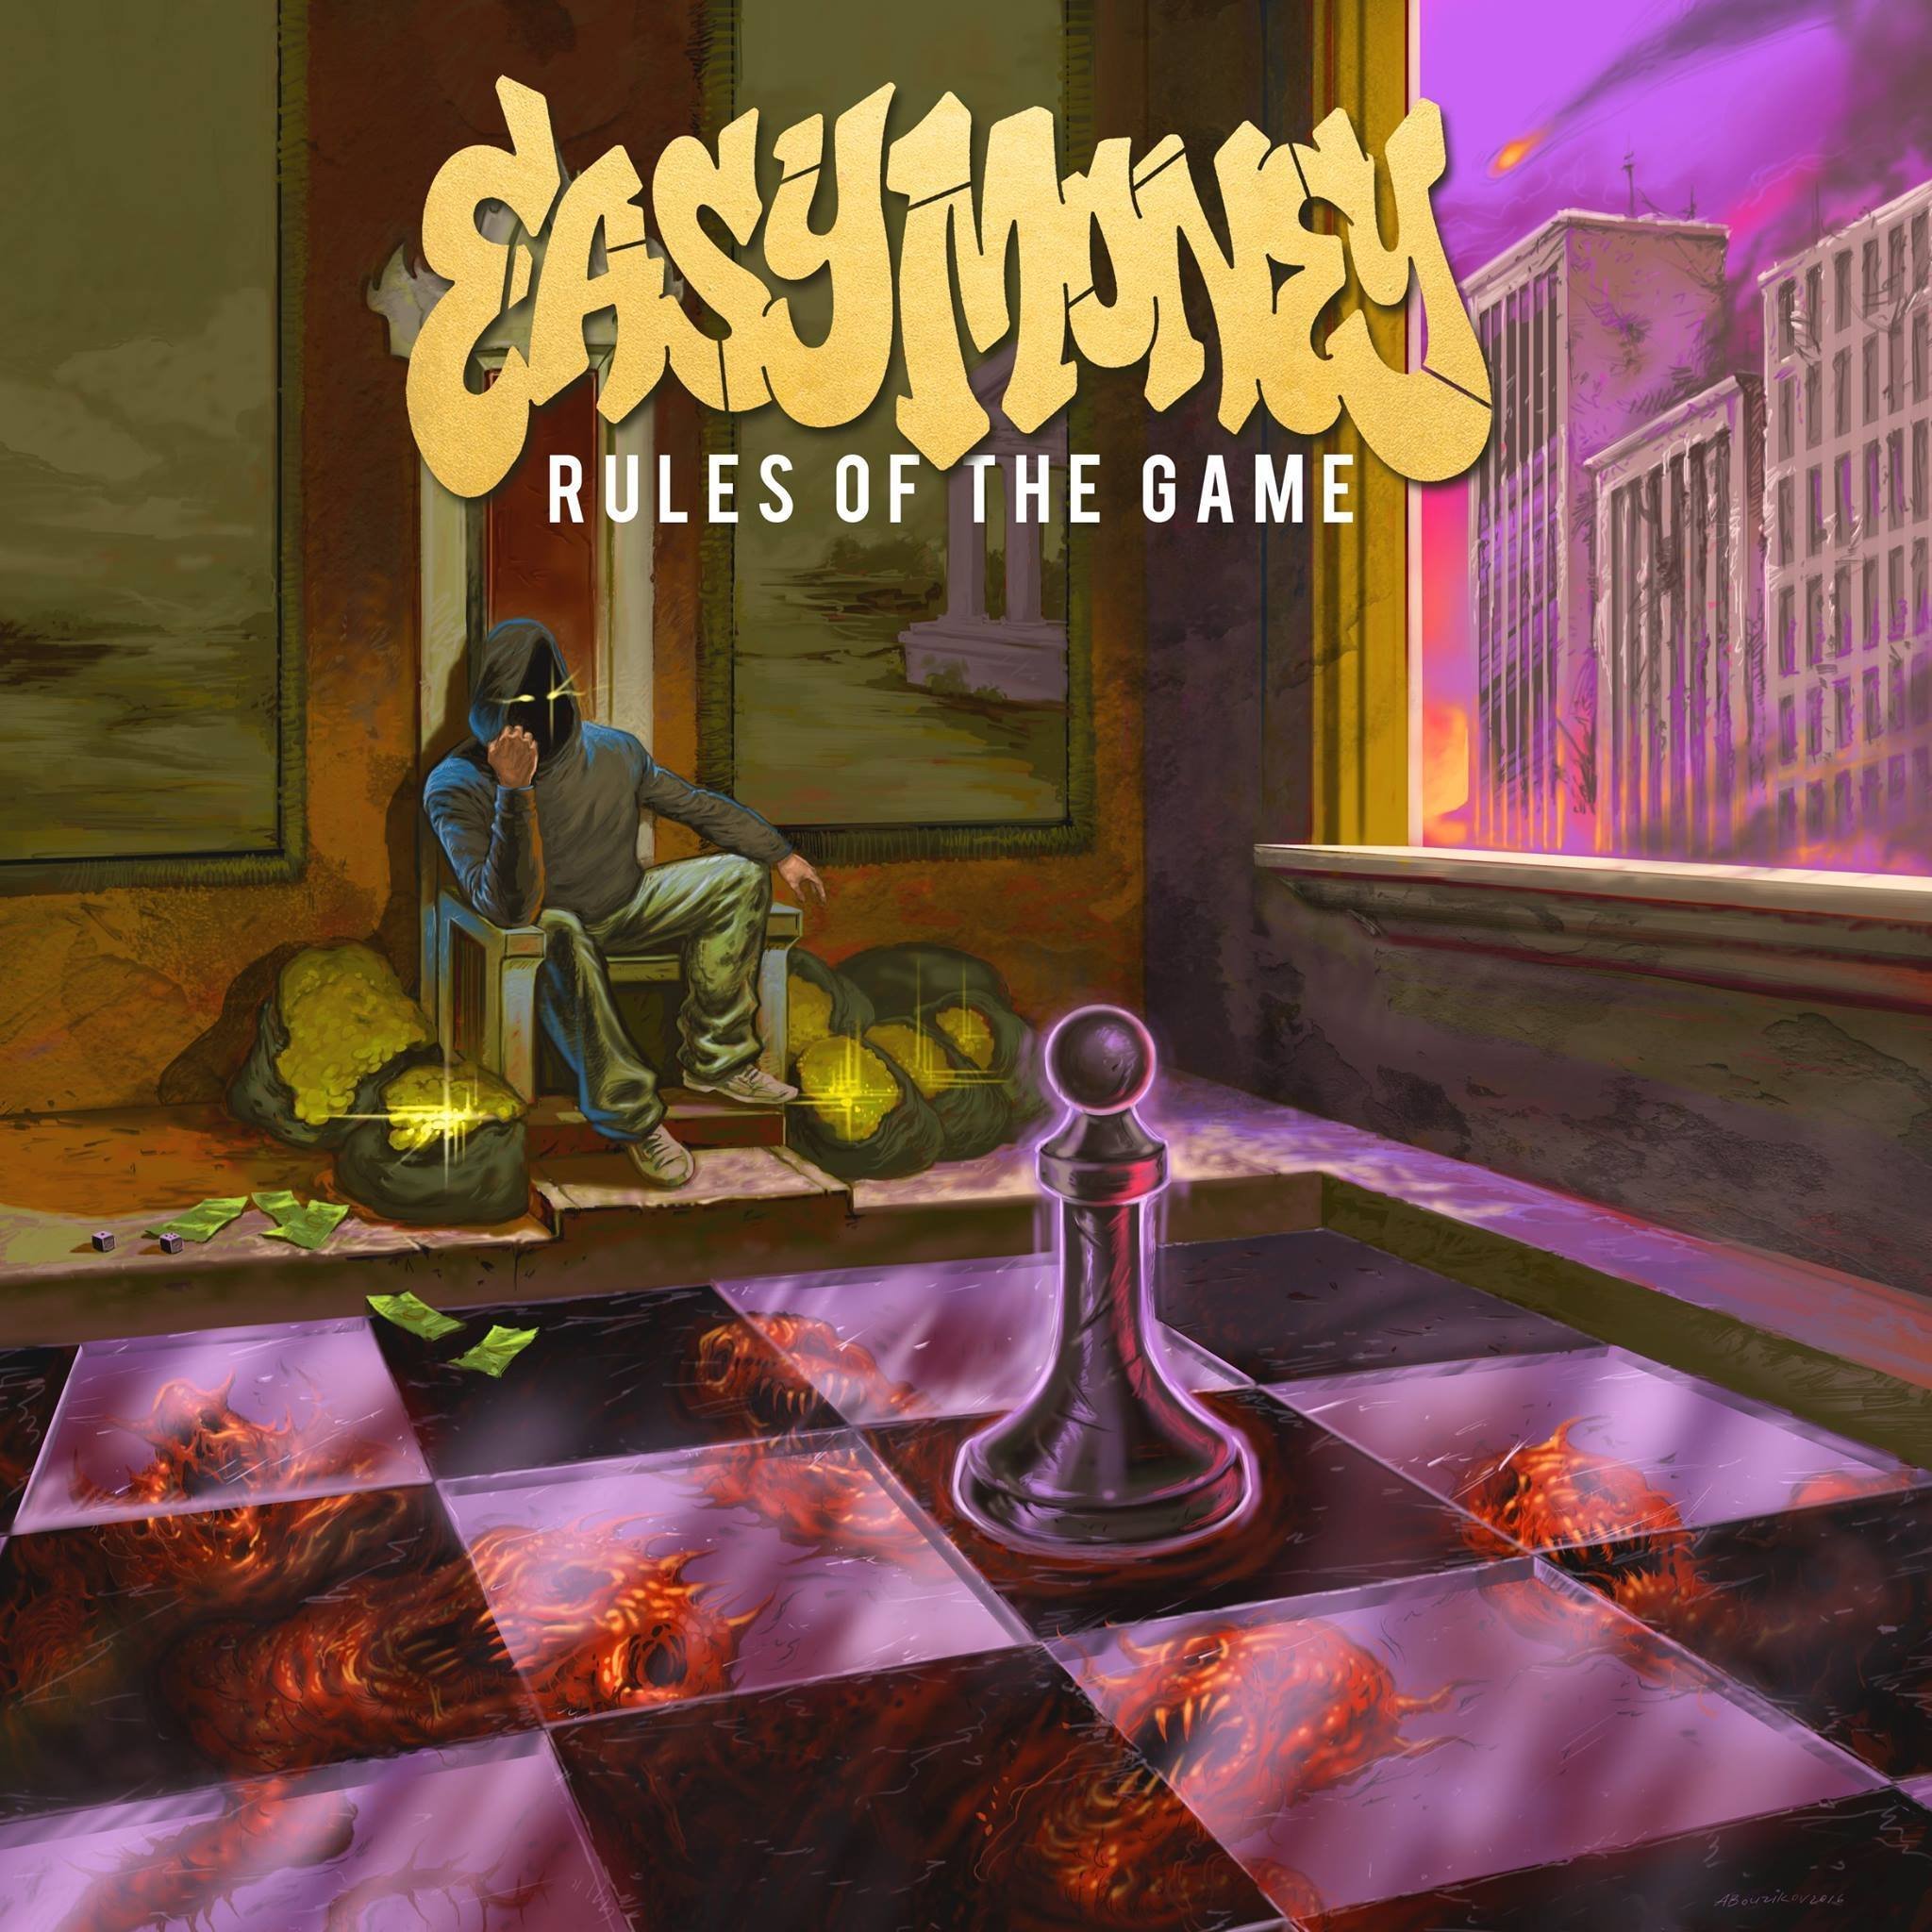 Easy Money "Rules of the Game"